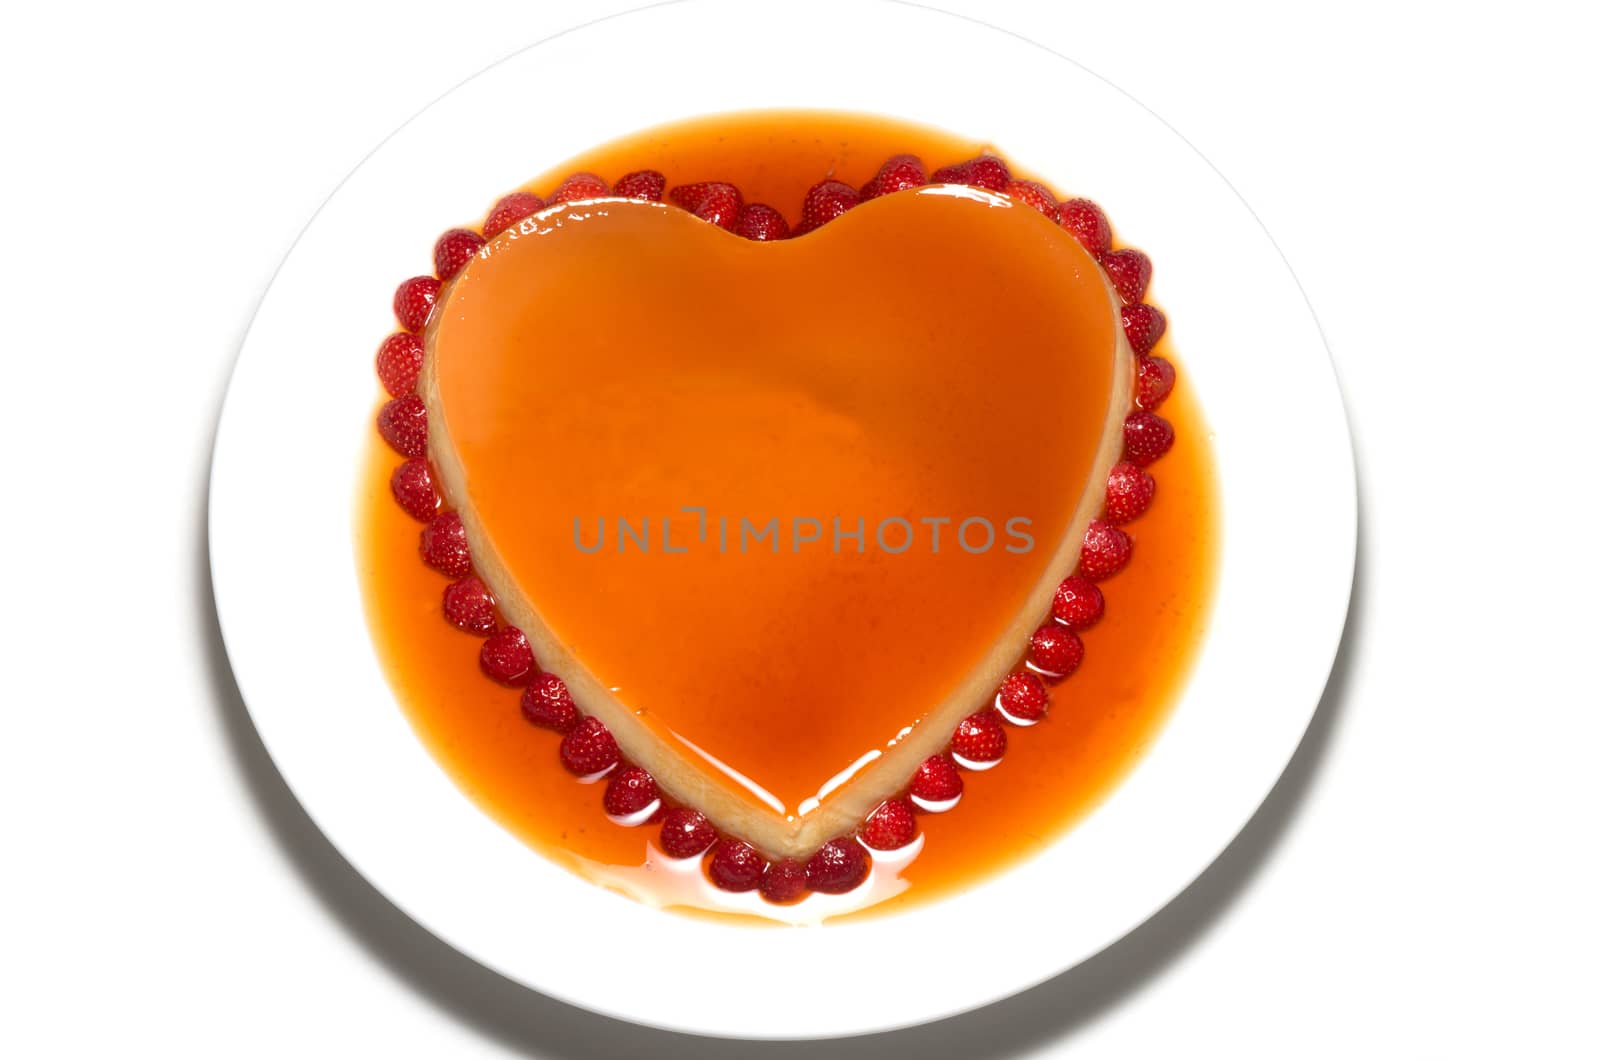 Heart shape flan caramel with strawberries on the edge on white background